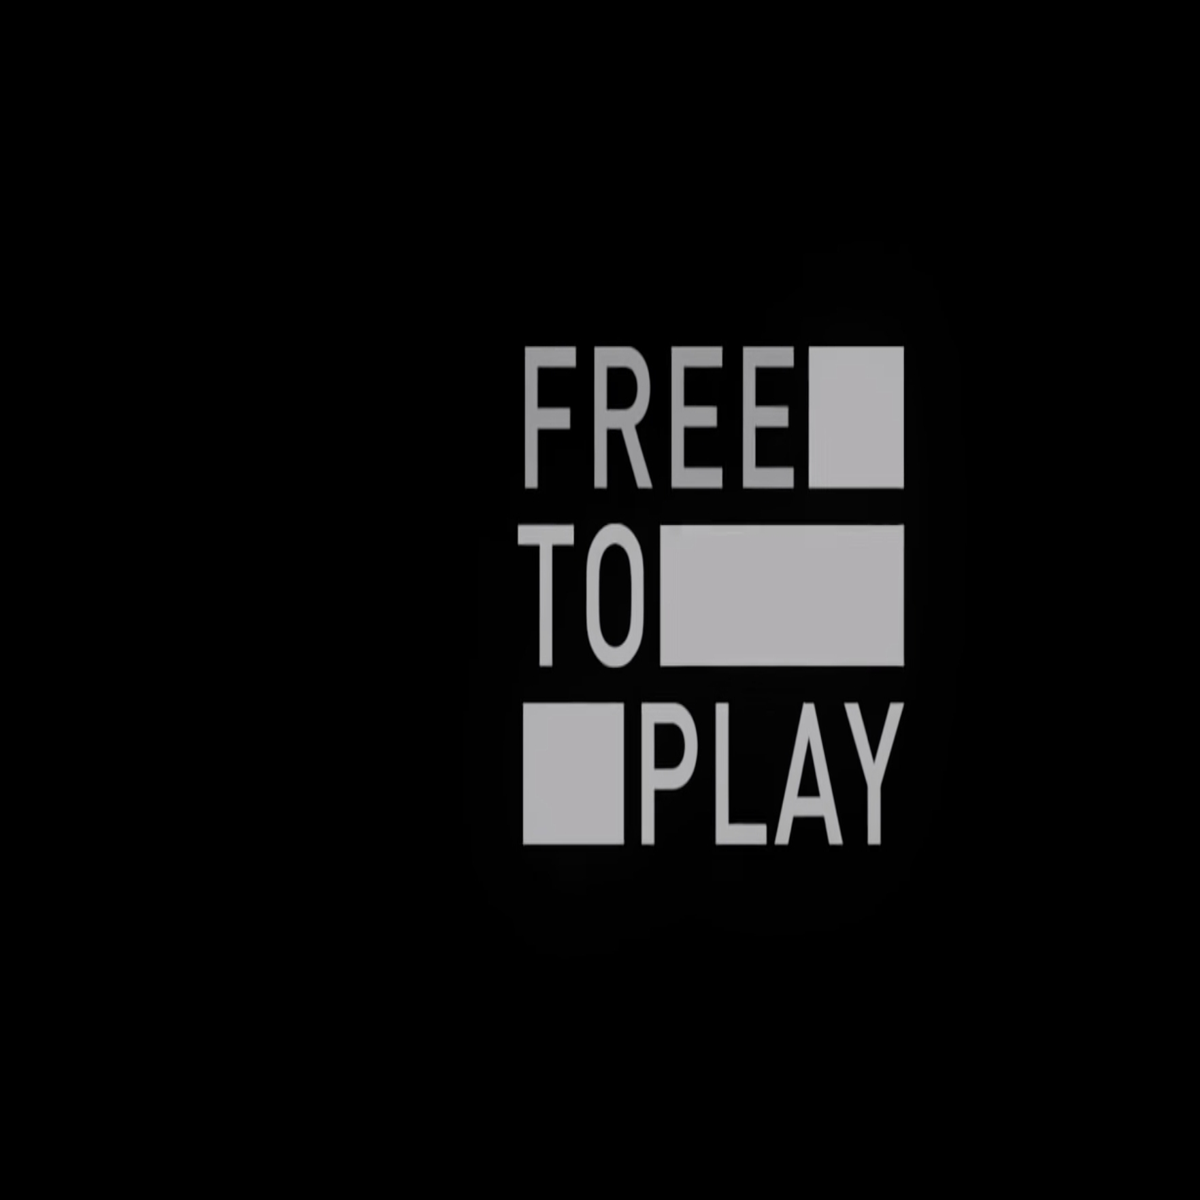 Valve's documentary film Free to Play is releasing on Netflix